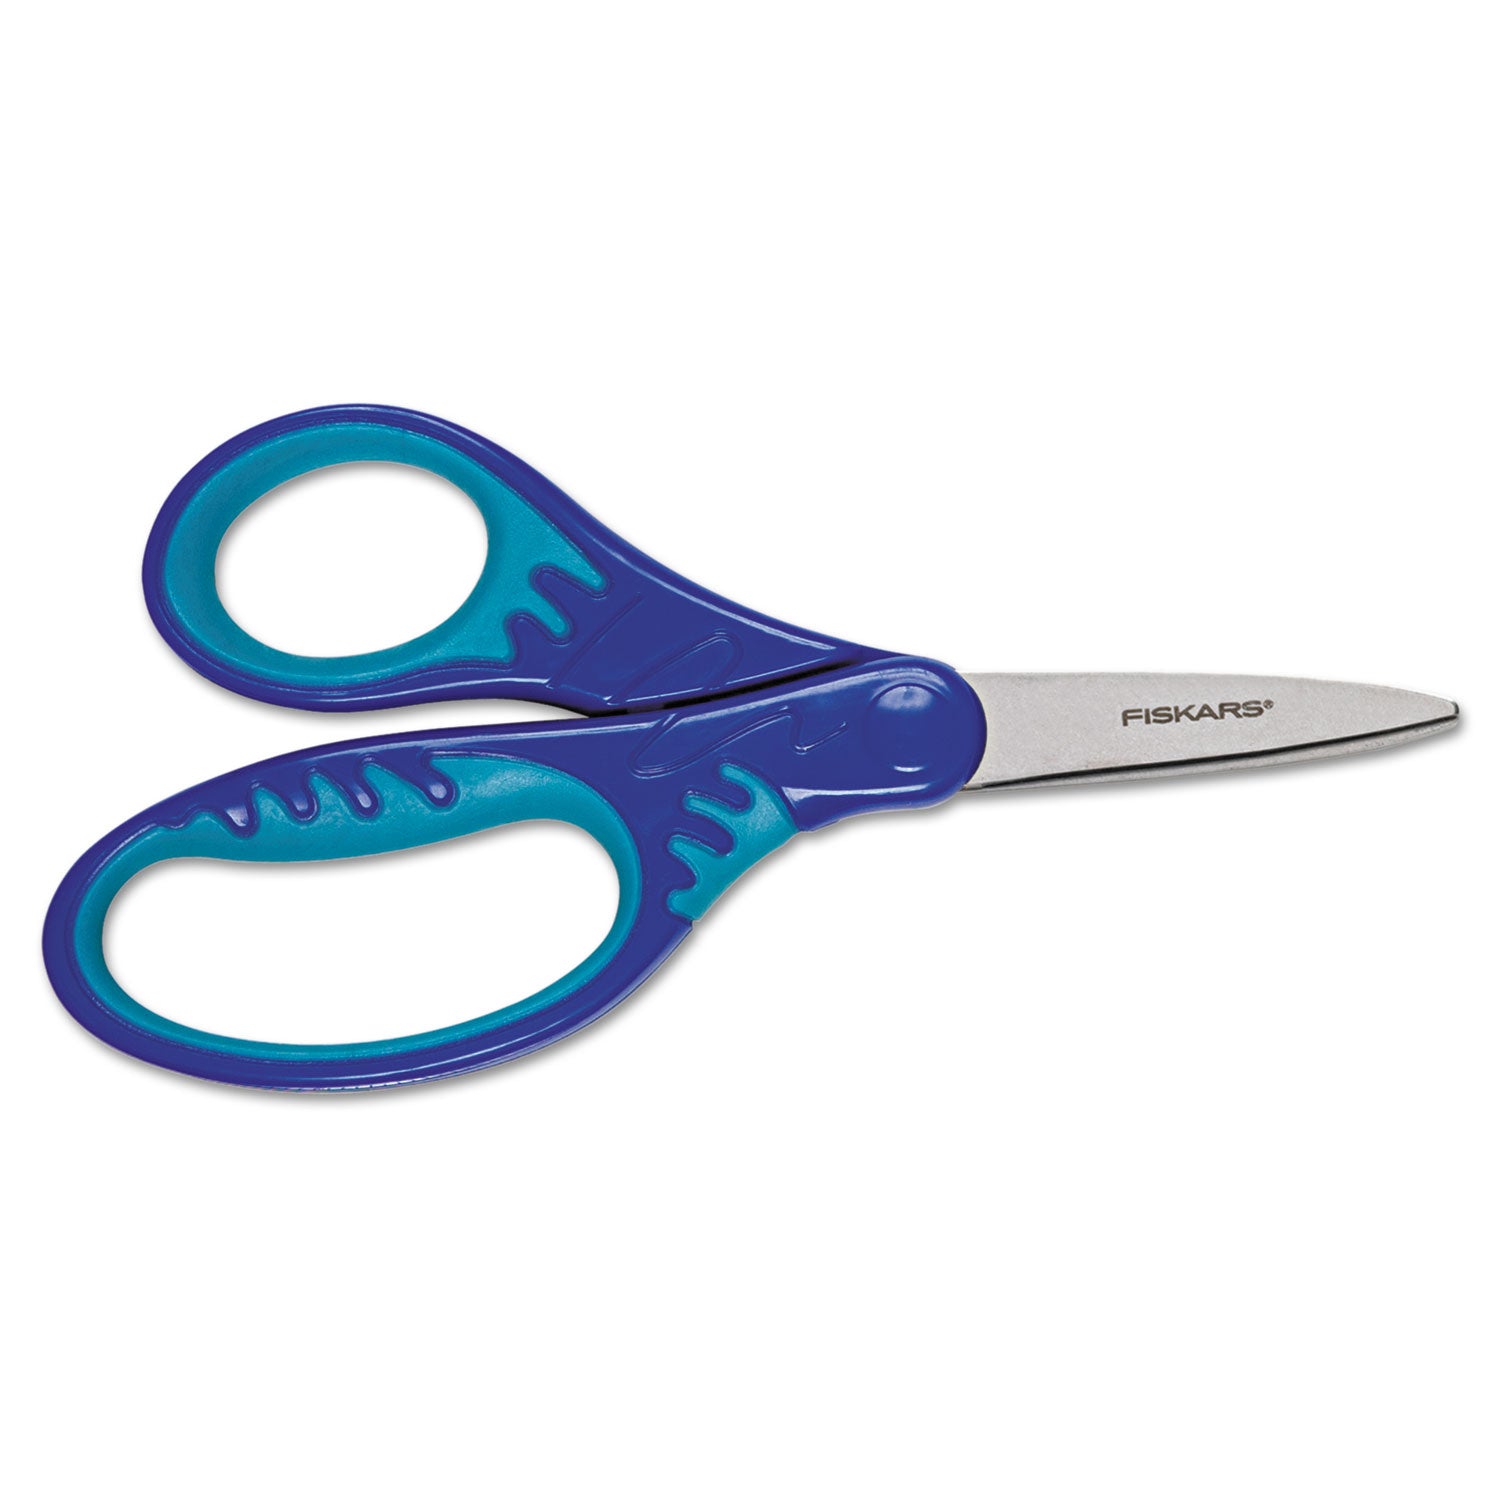 Kids/Student Softgrip Scissors, Pointed Tip, 5 Long, 1.75 Cut Length, Randomly Assorted Straight Handles - 